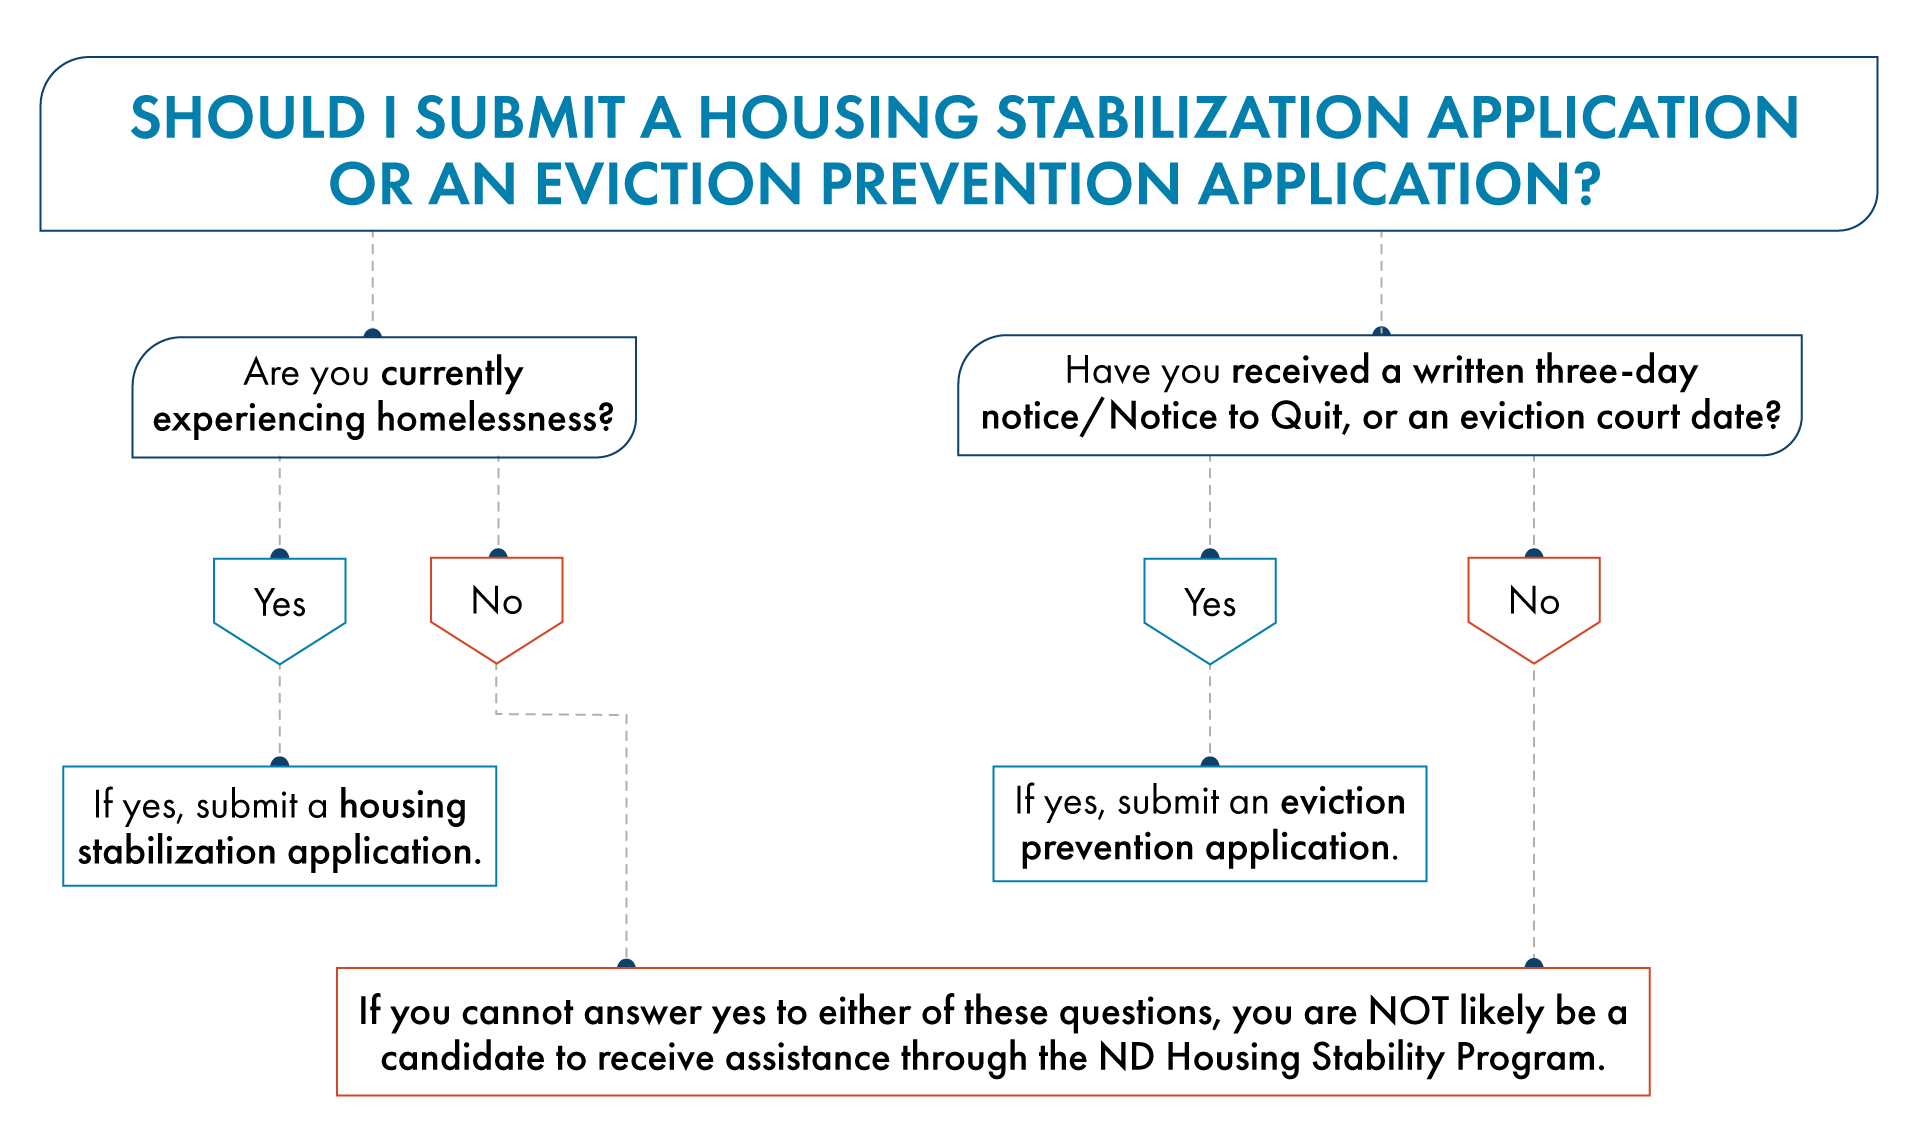 Visual of the application decision flowchart